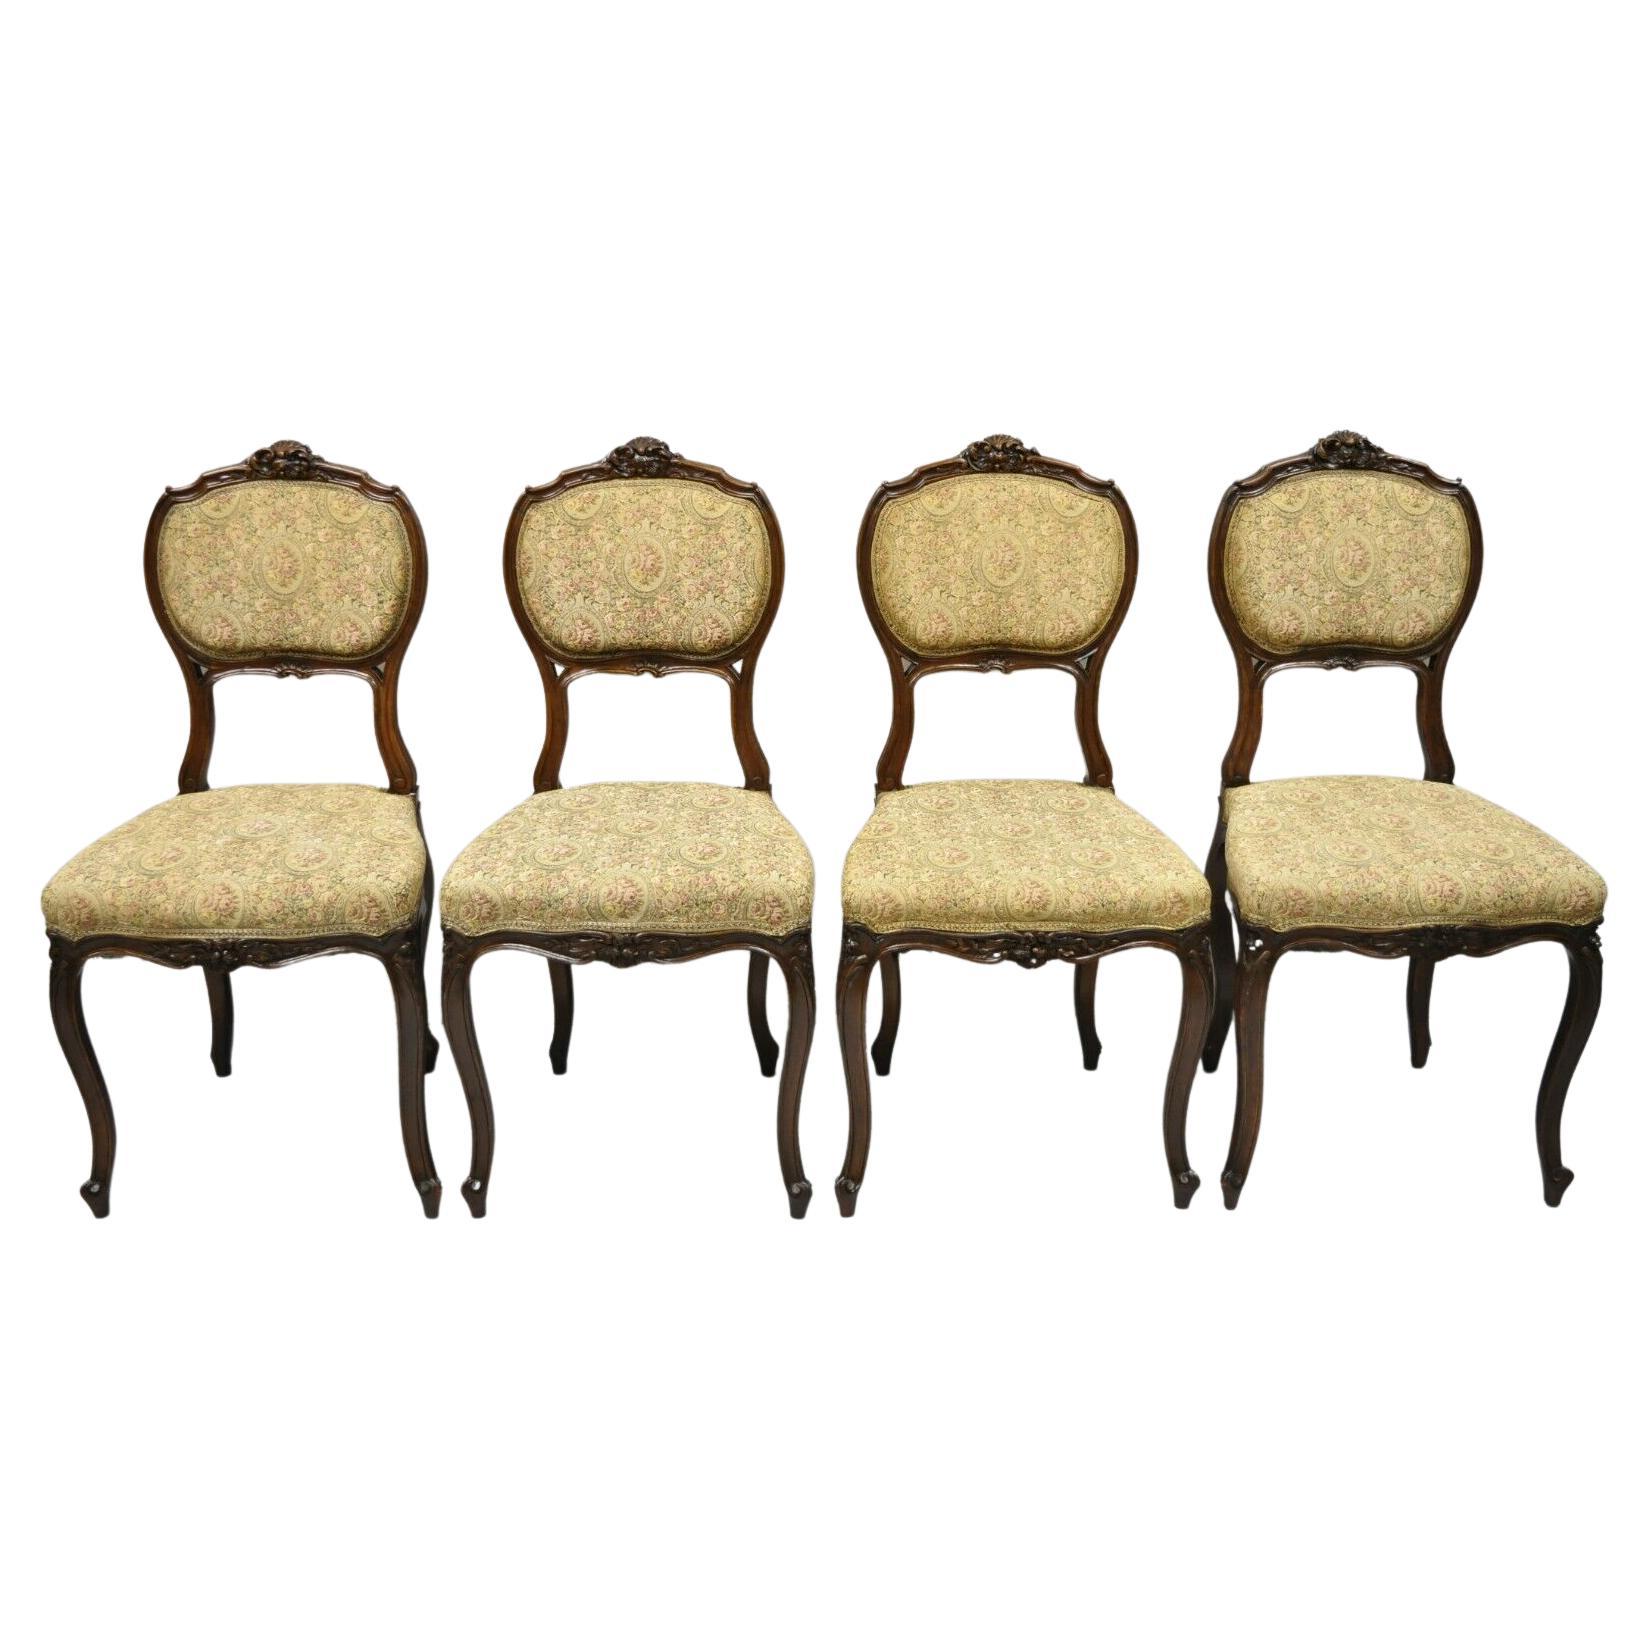 Antique French Victorian Mahogany Upholstered Parlor Side Chairs, Set of 4